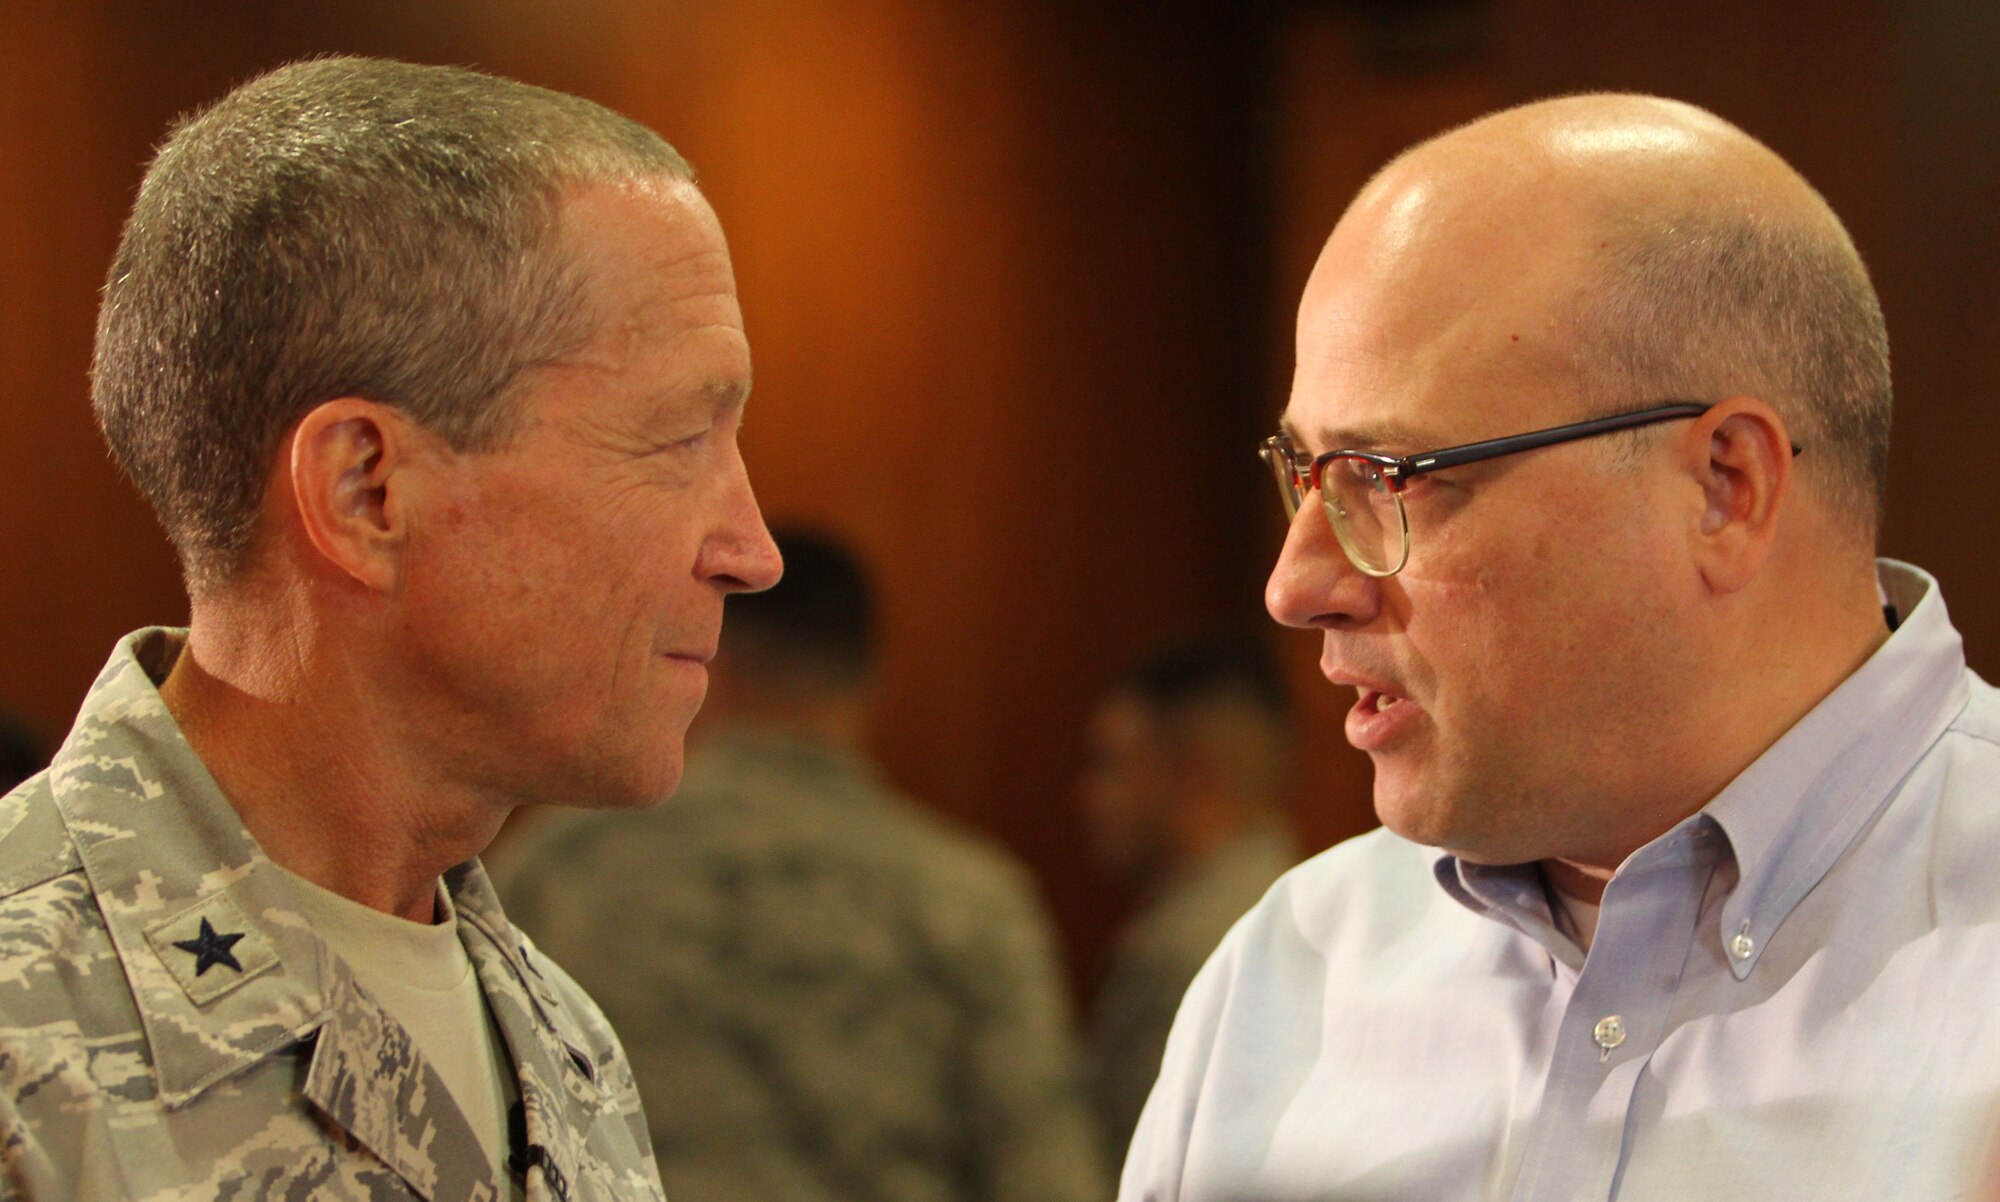 Investor and businessman, Charles Von Thun of Denver, discusses professional credentialing with U.S. Air Force Brig. Gen. Paul Ayers of Leesburg, Va., after a meeting of the Guard and Reserve Network, (U.S. Air Force photo / Scot Talcott) 
